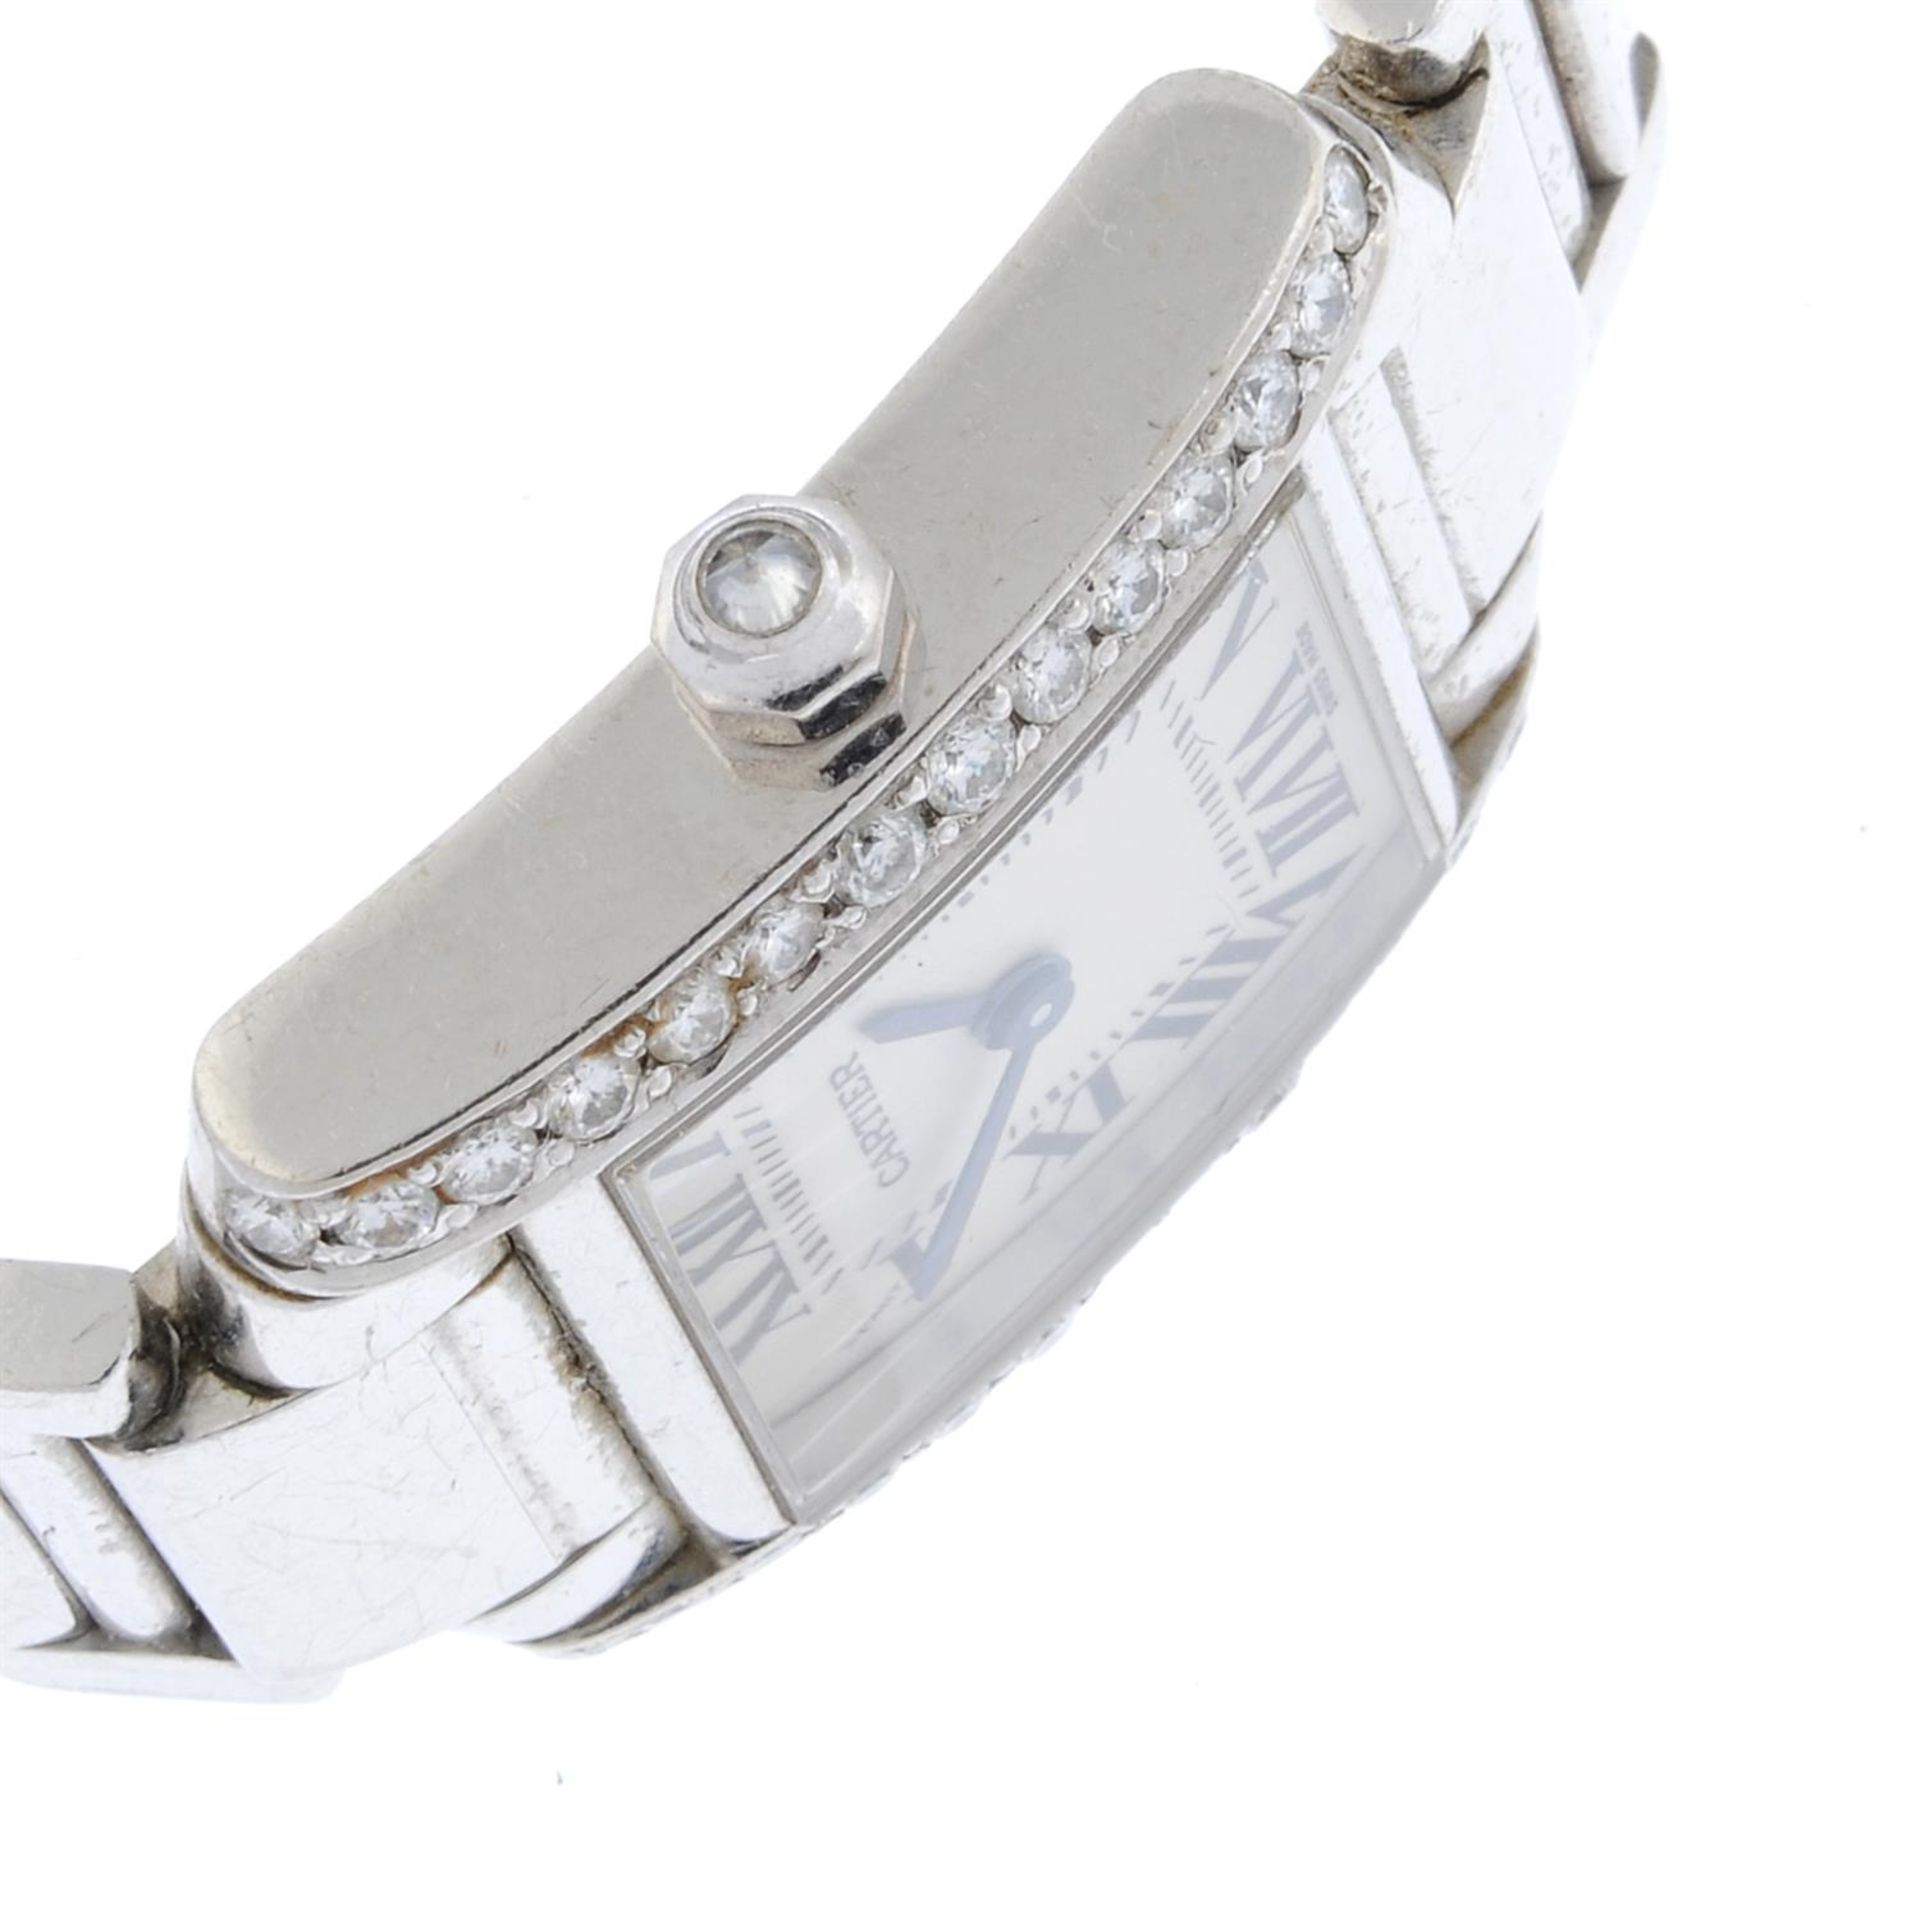 CARTIER - an 18ct white gold Tank Francaise bracelet watch, 20mm. - Image 4 of 6